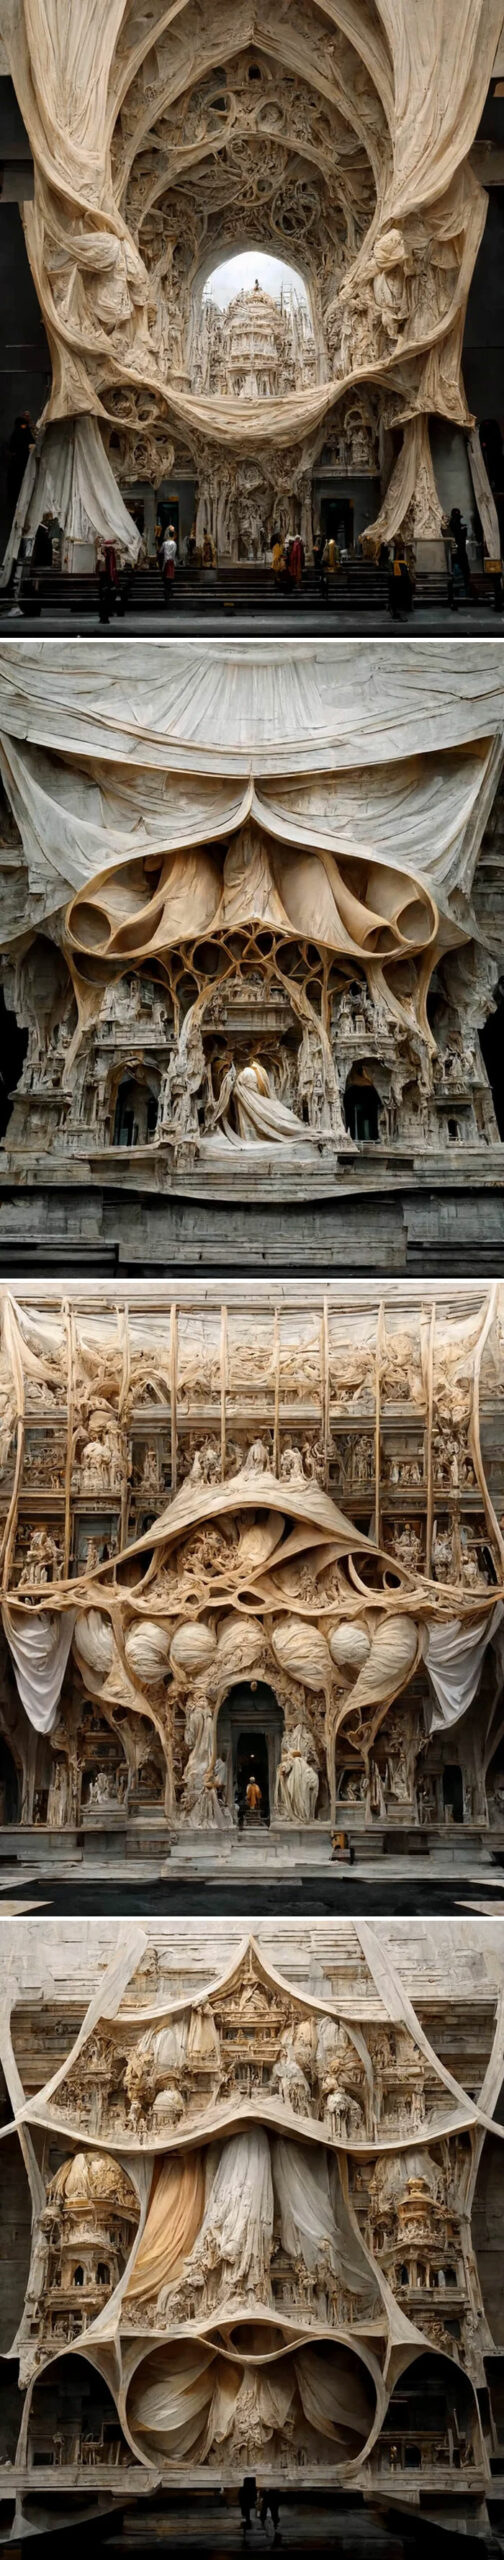 Imagine The "Blurred Zone" - Renaissance And Baroque Facades Experiments With Tensile Structure By Mohammad Qasim Iqbal